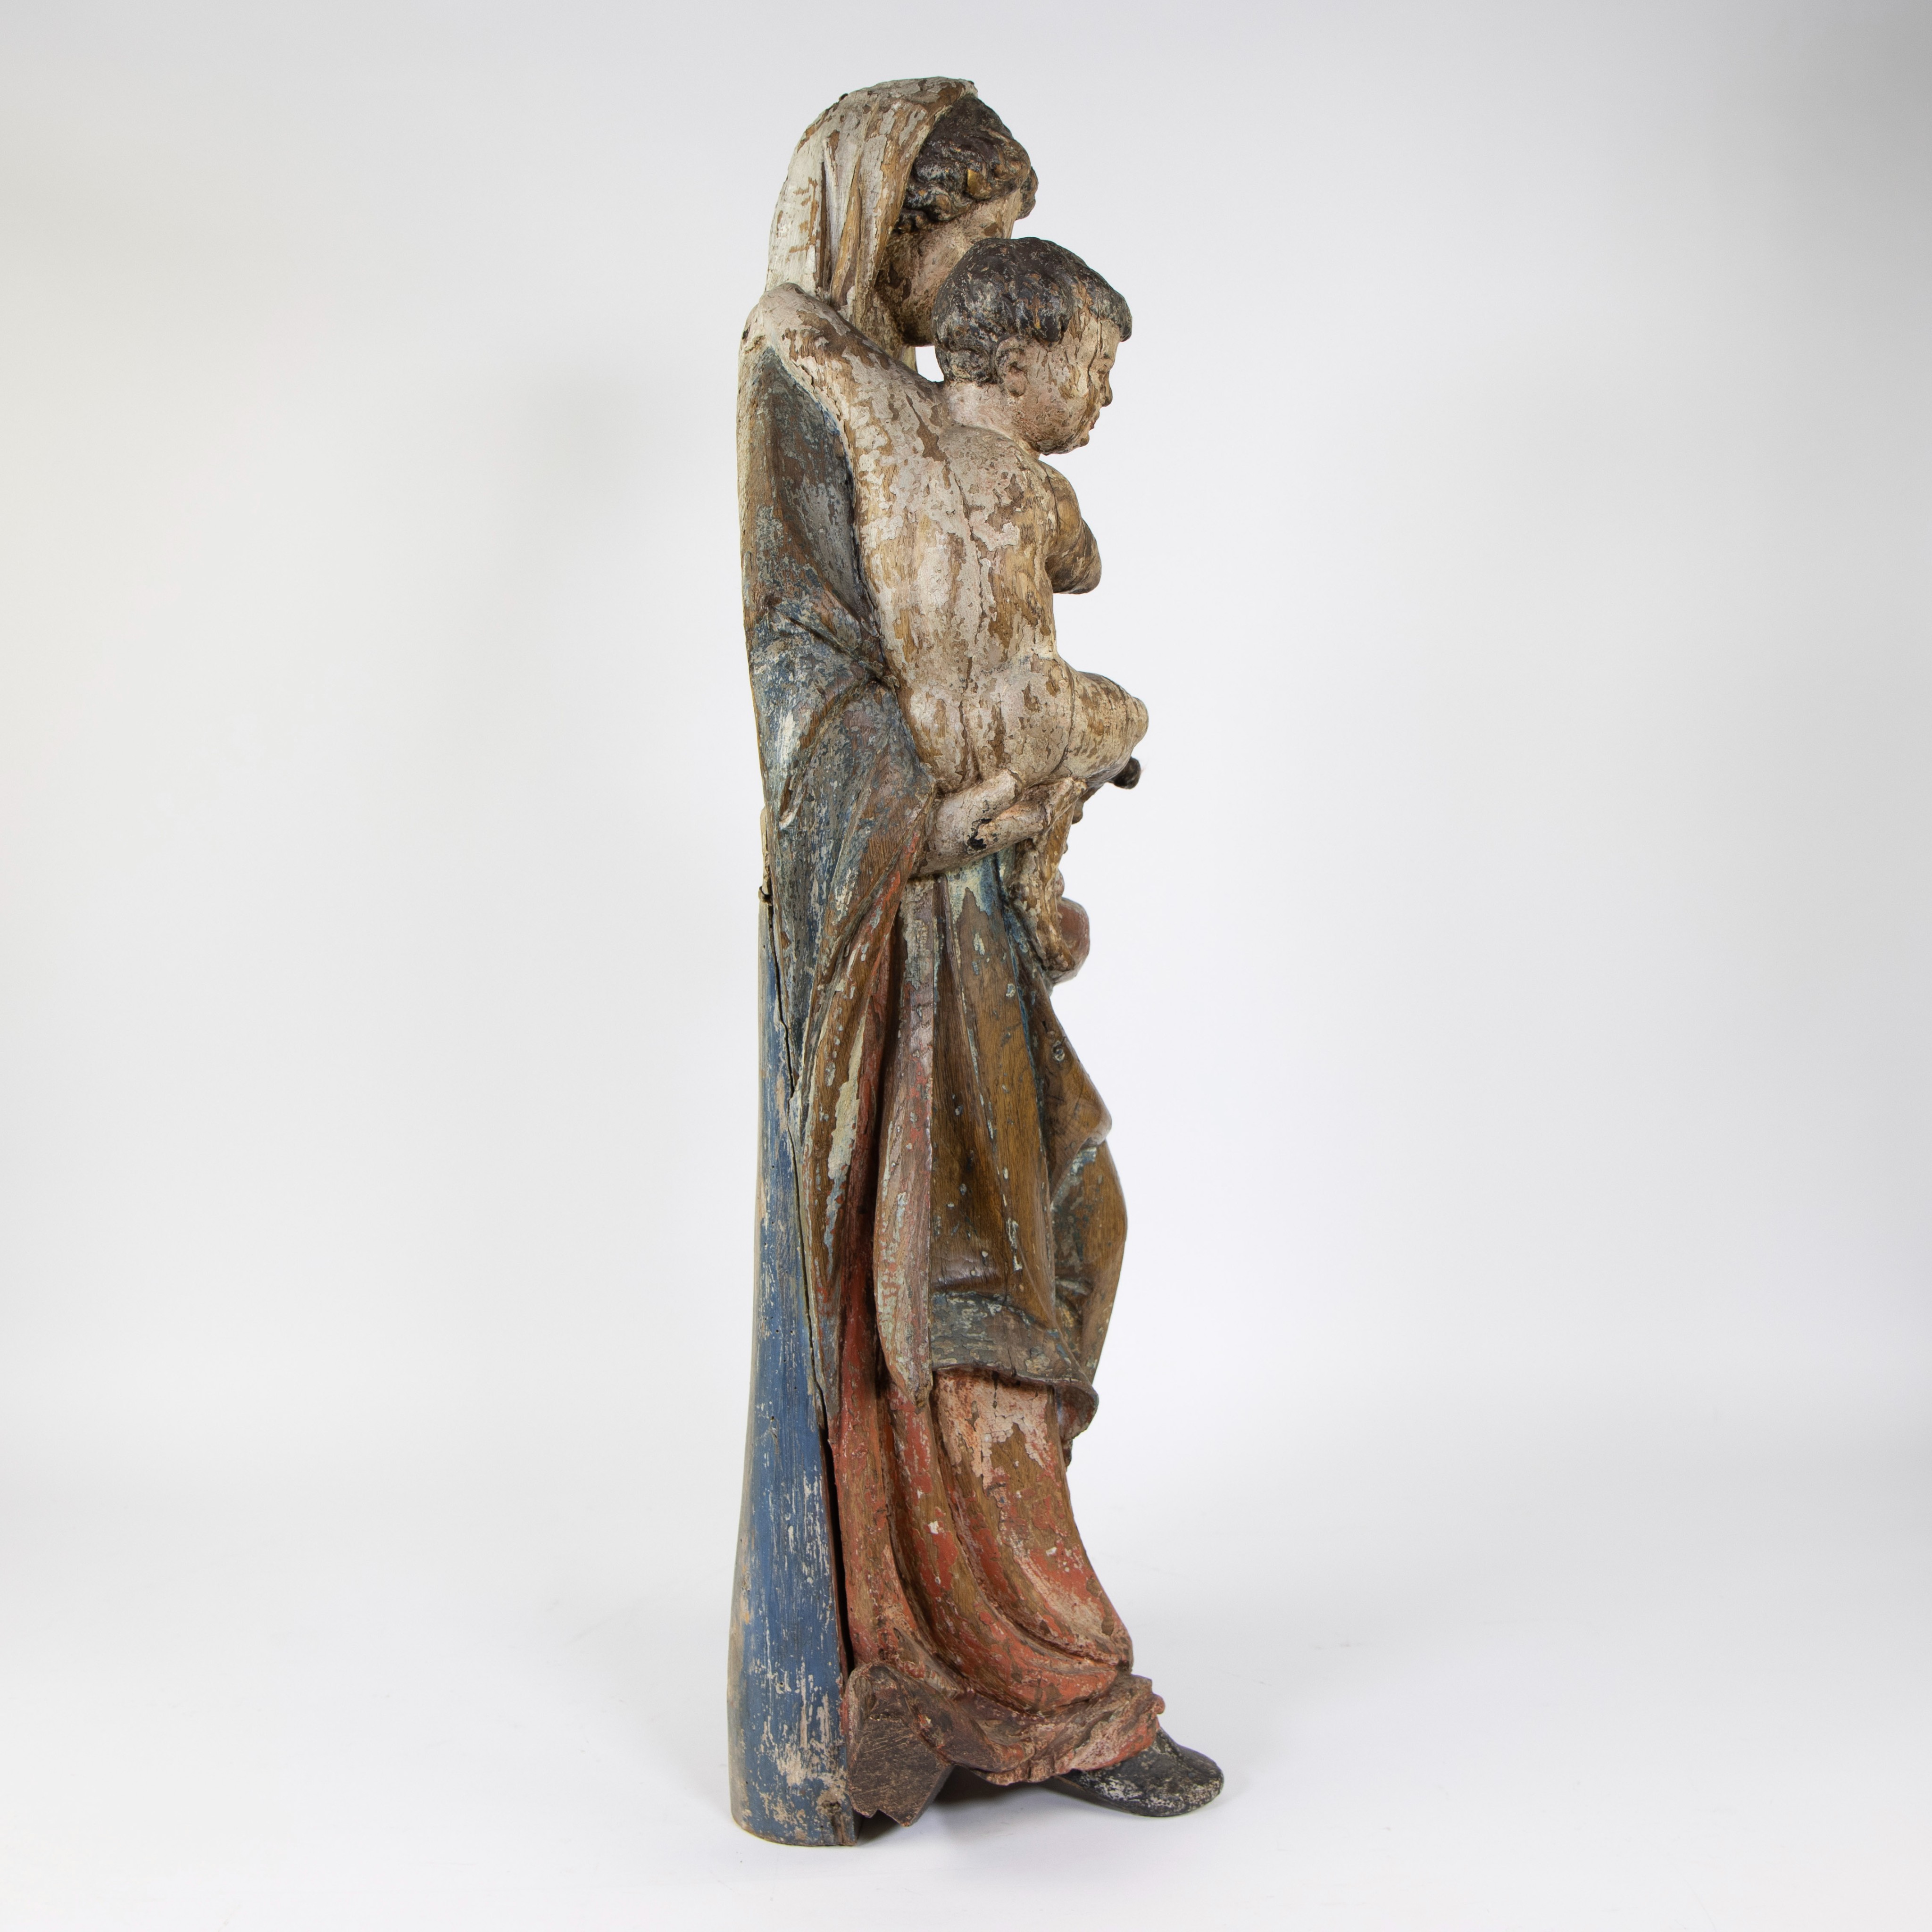 Wooden statue of Madonna with child Jesus, original polychromy, late 17th early 18th century - Image 5 of 5